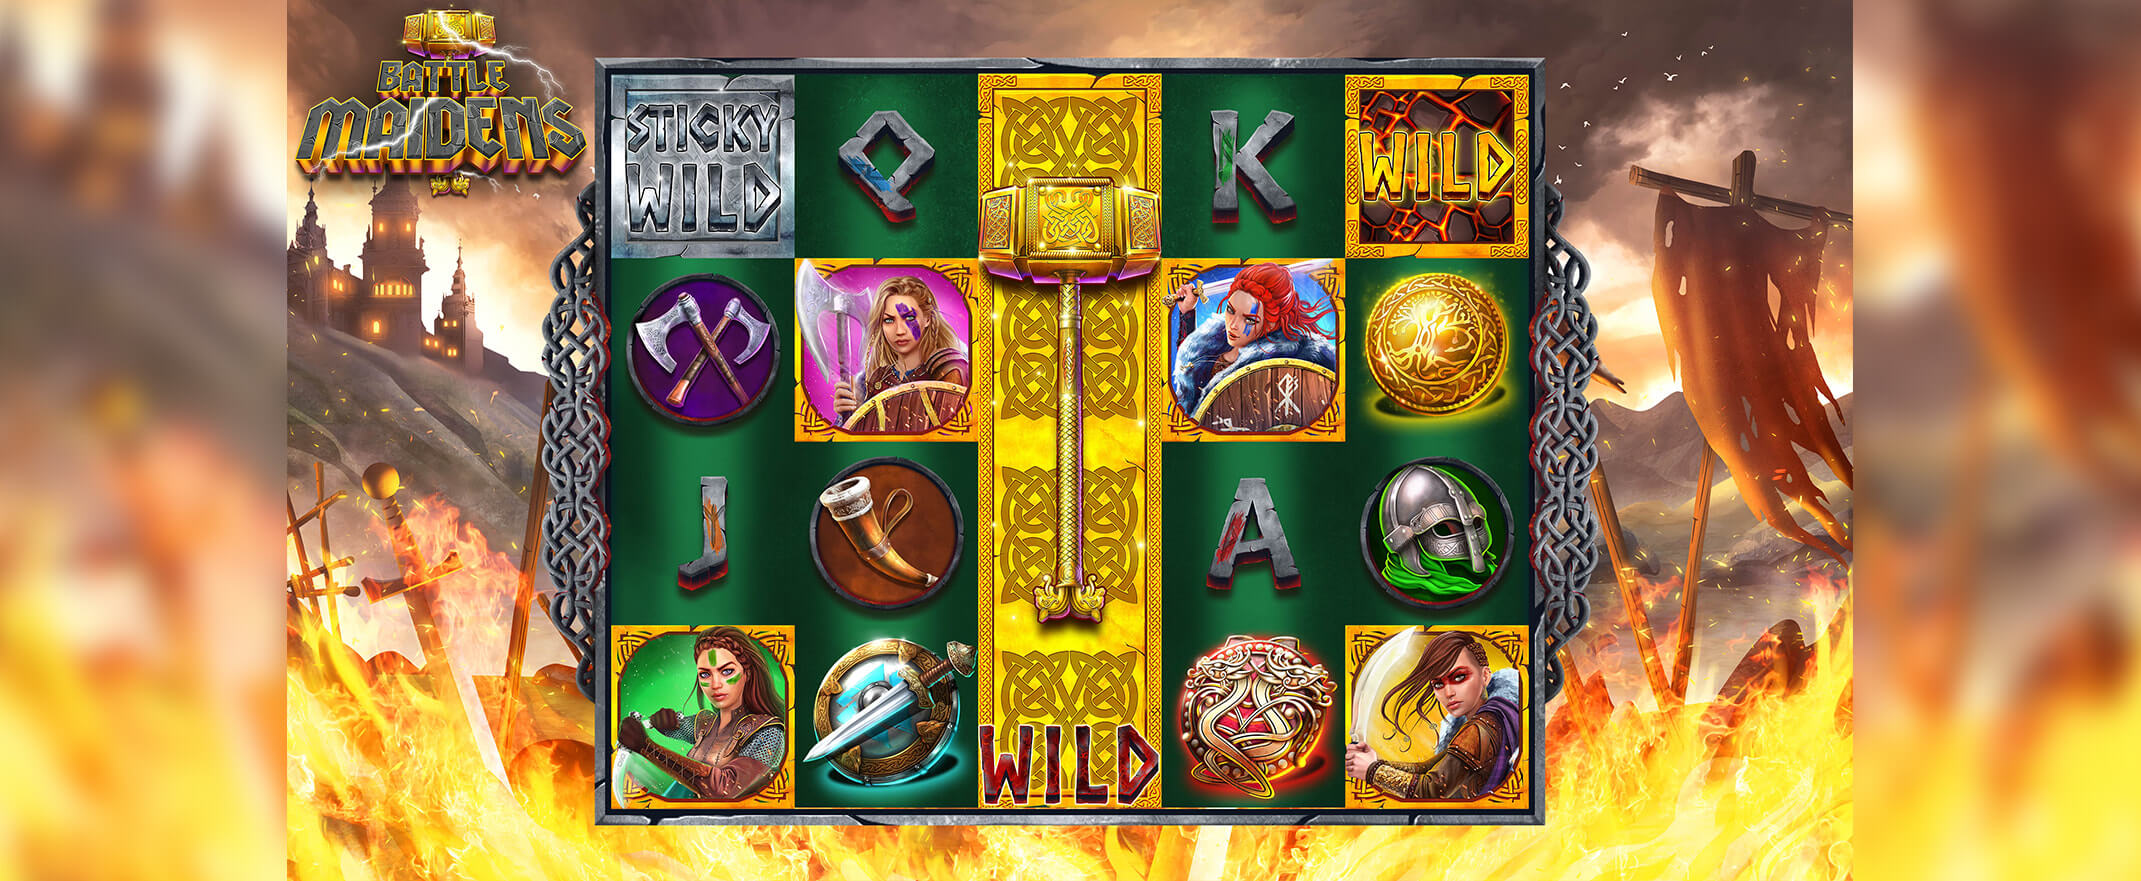 Battle Maidens Slot Review, image of the reels and symbols